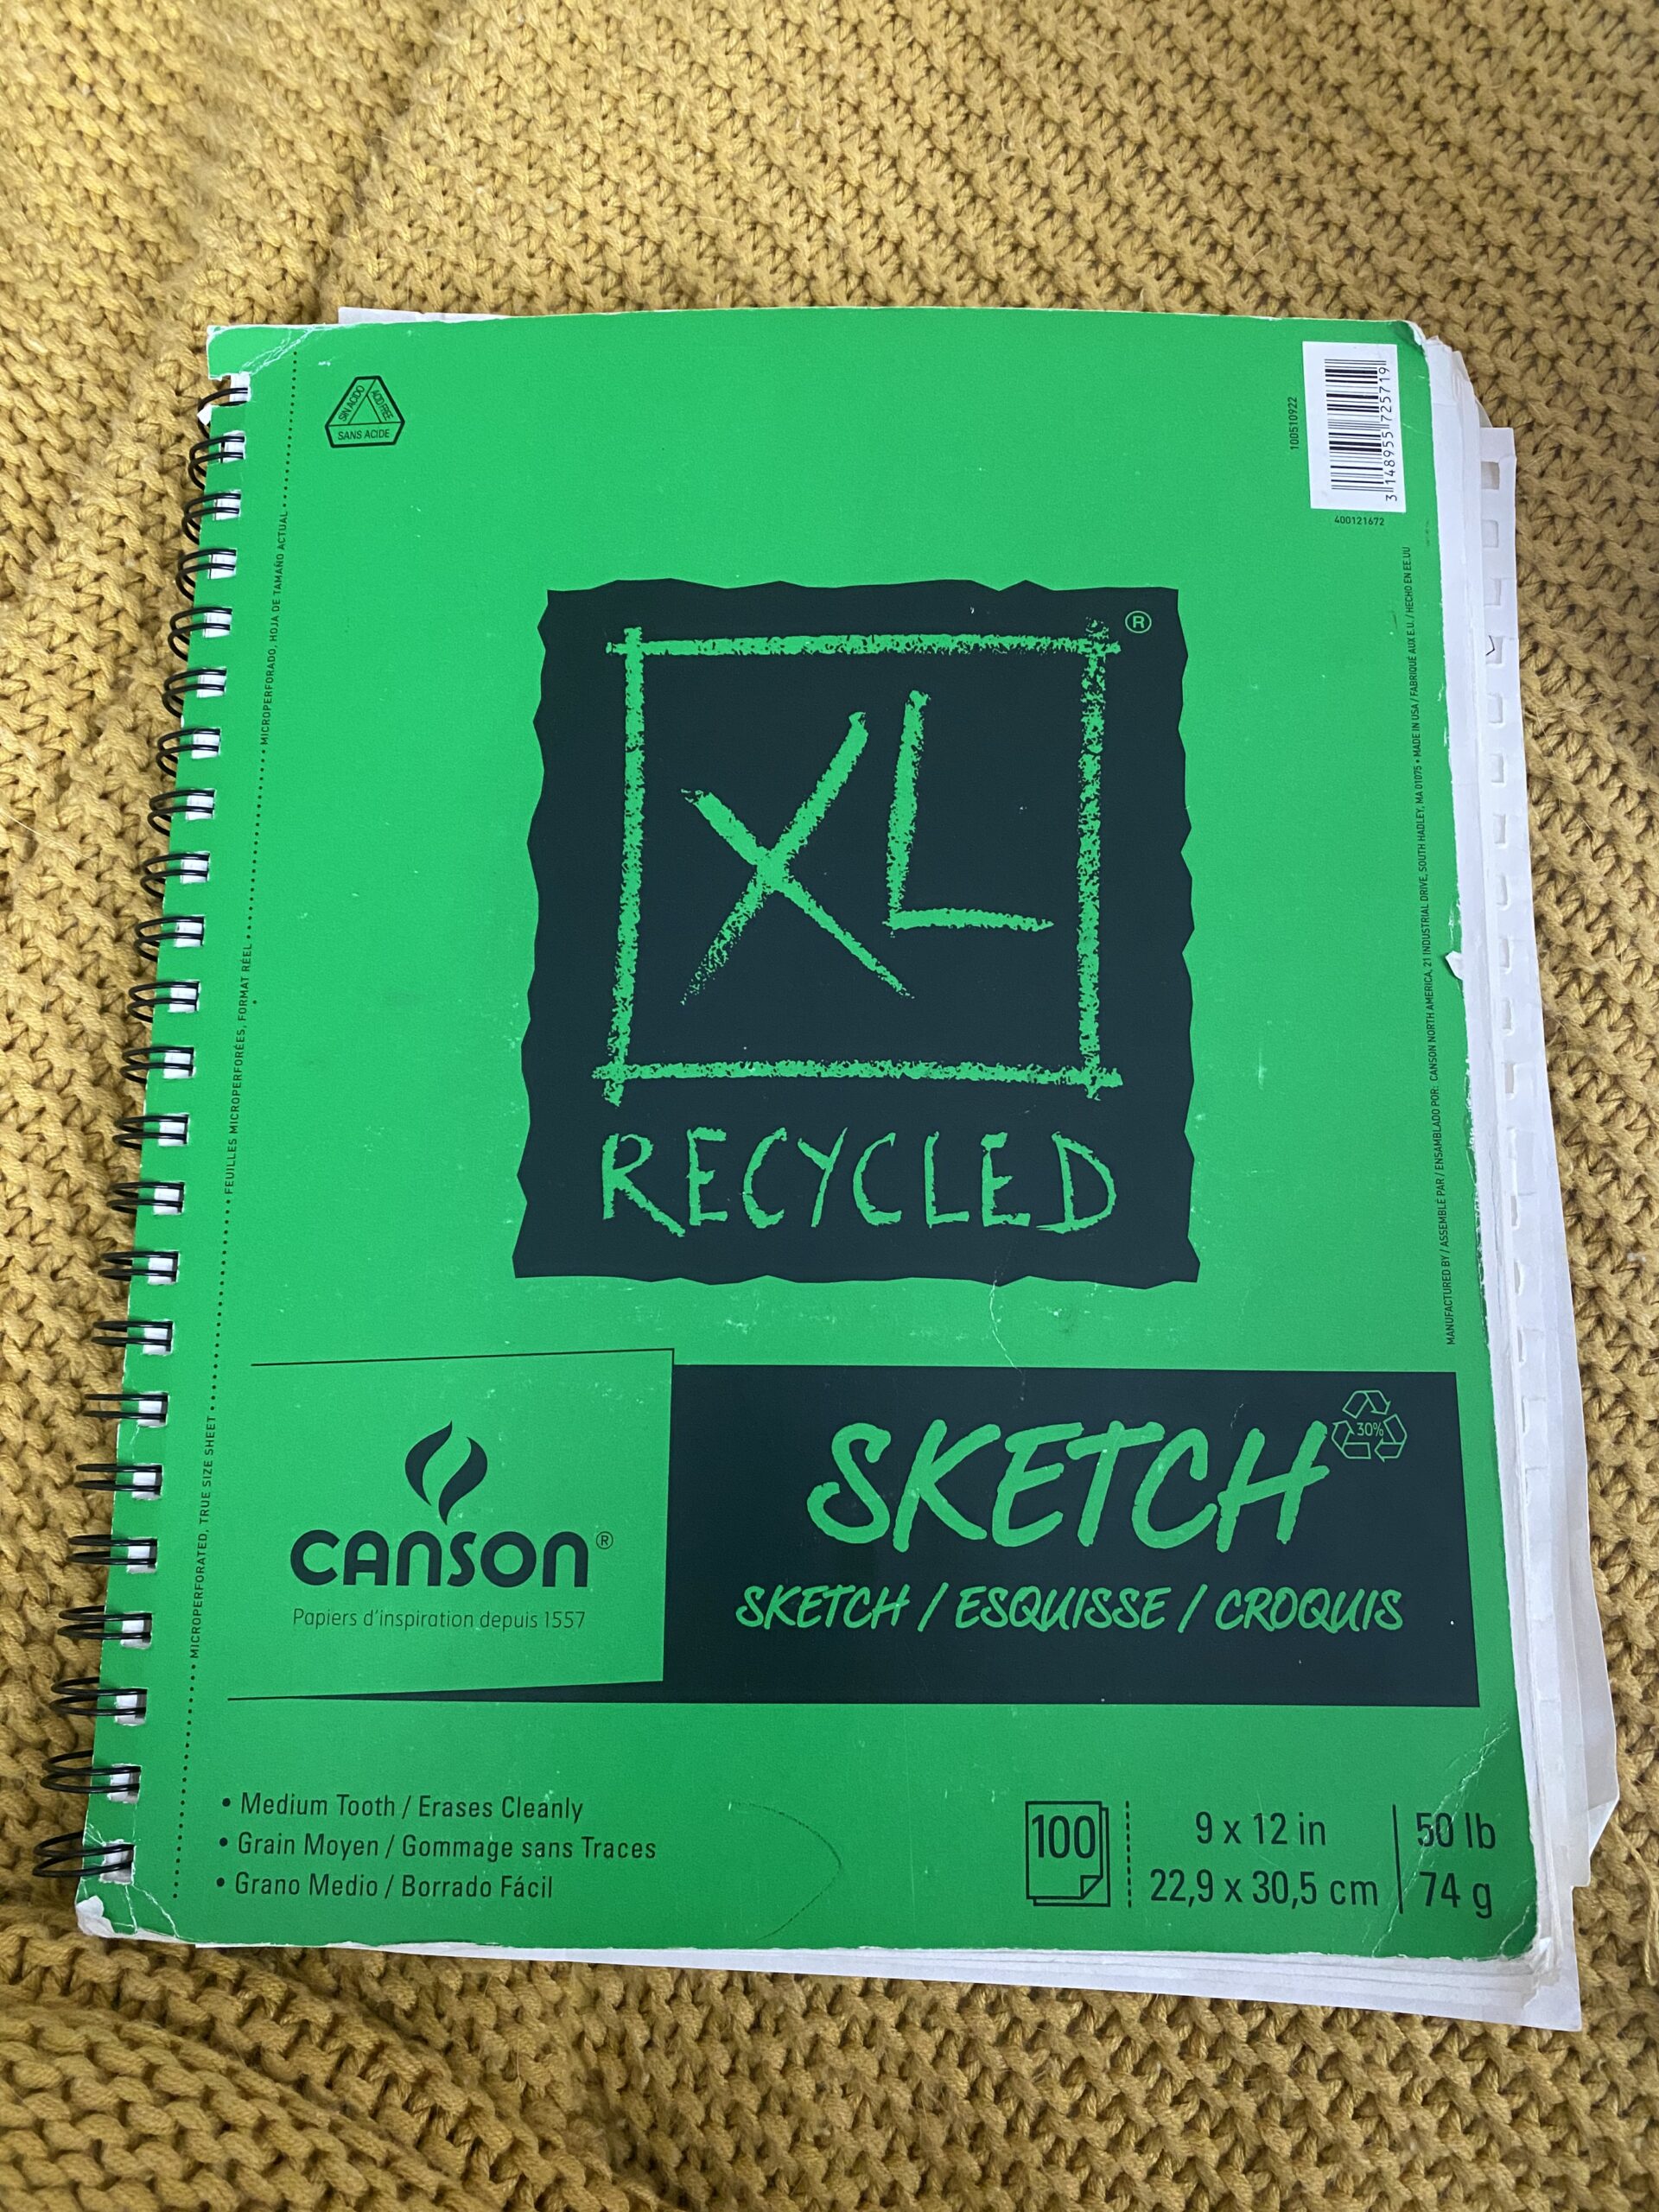 Front cover of Hannahs Sketchbook. It is green with black lettering